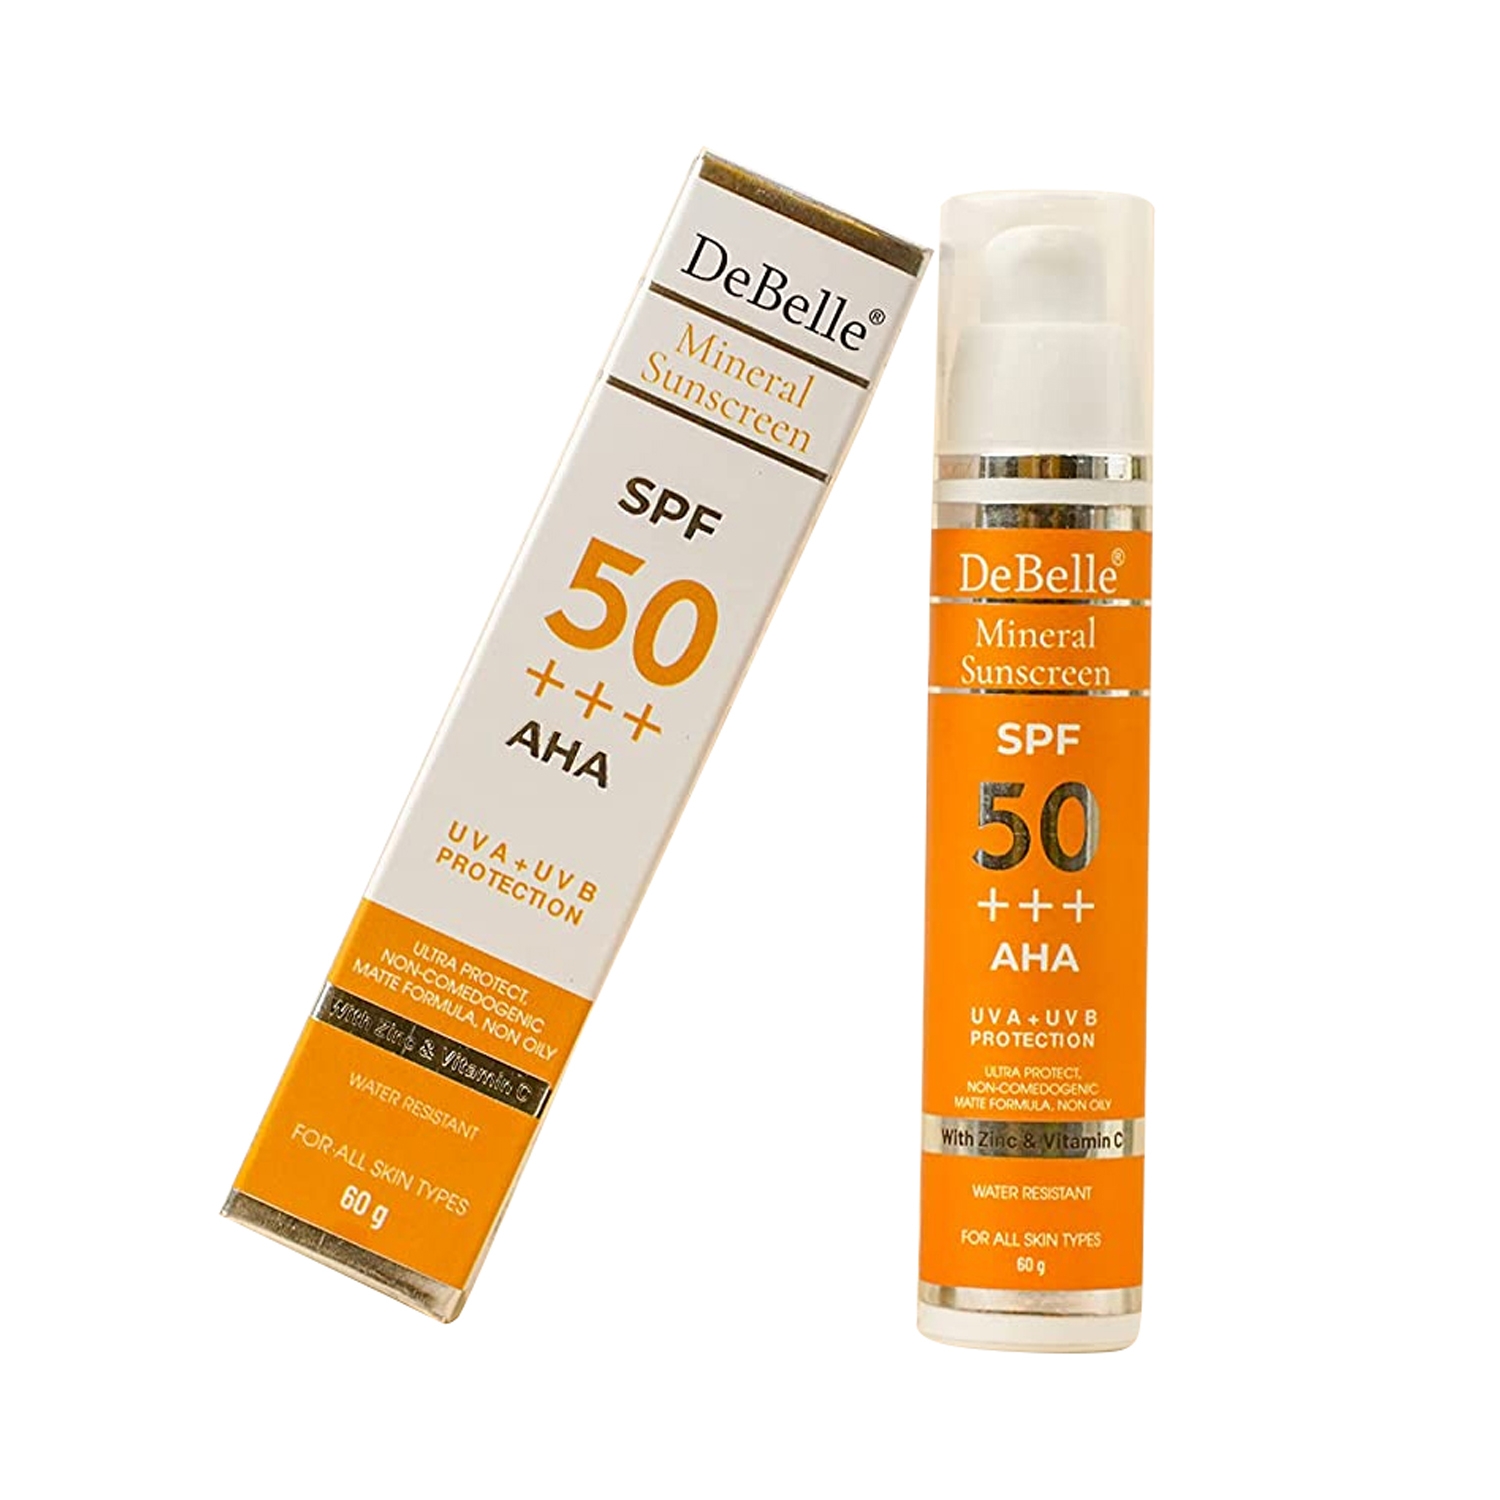 DeBelle | DeBelle Mineral Sunscreen SPF 50+++ With Vitamin C (60g)